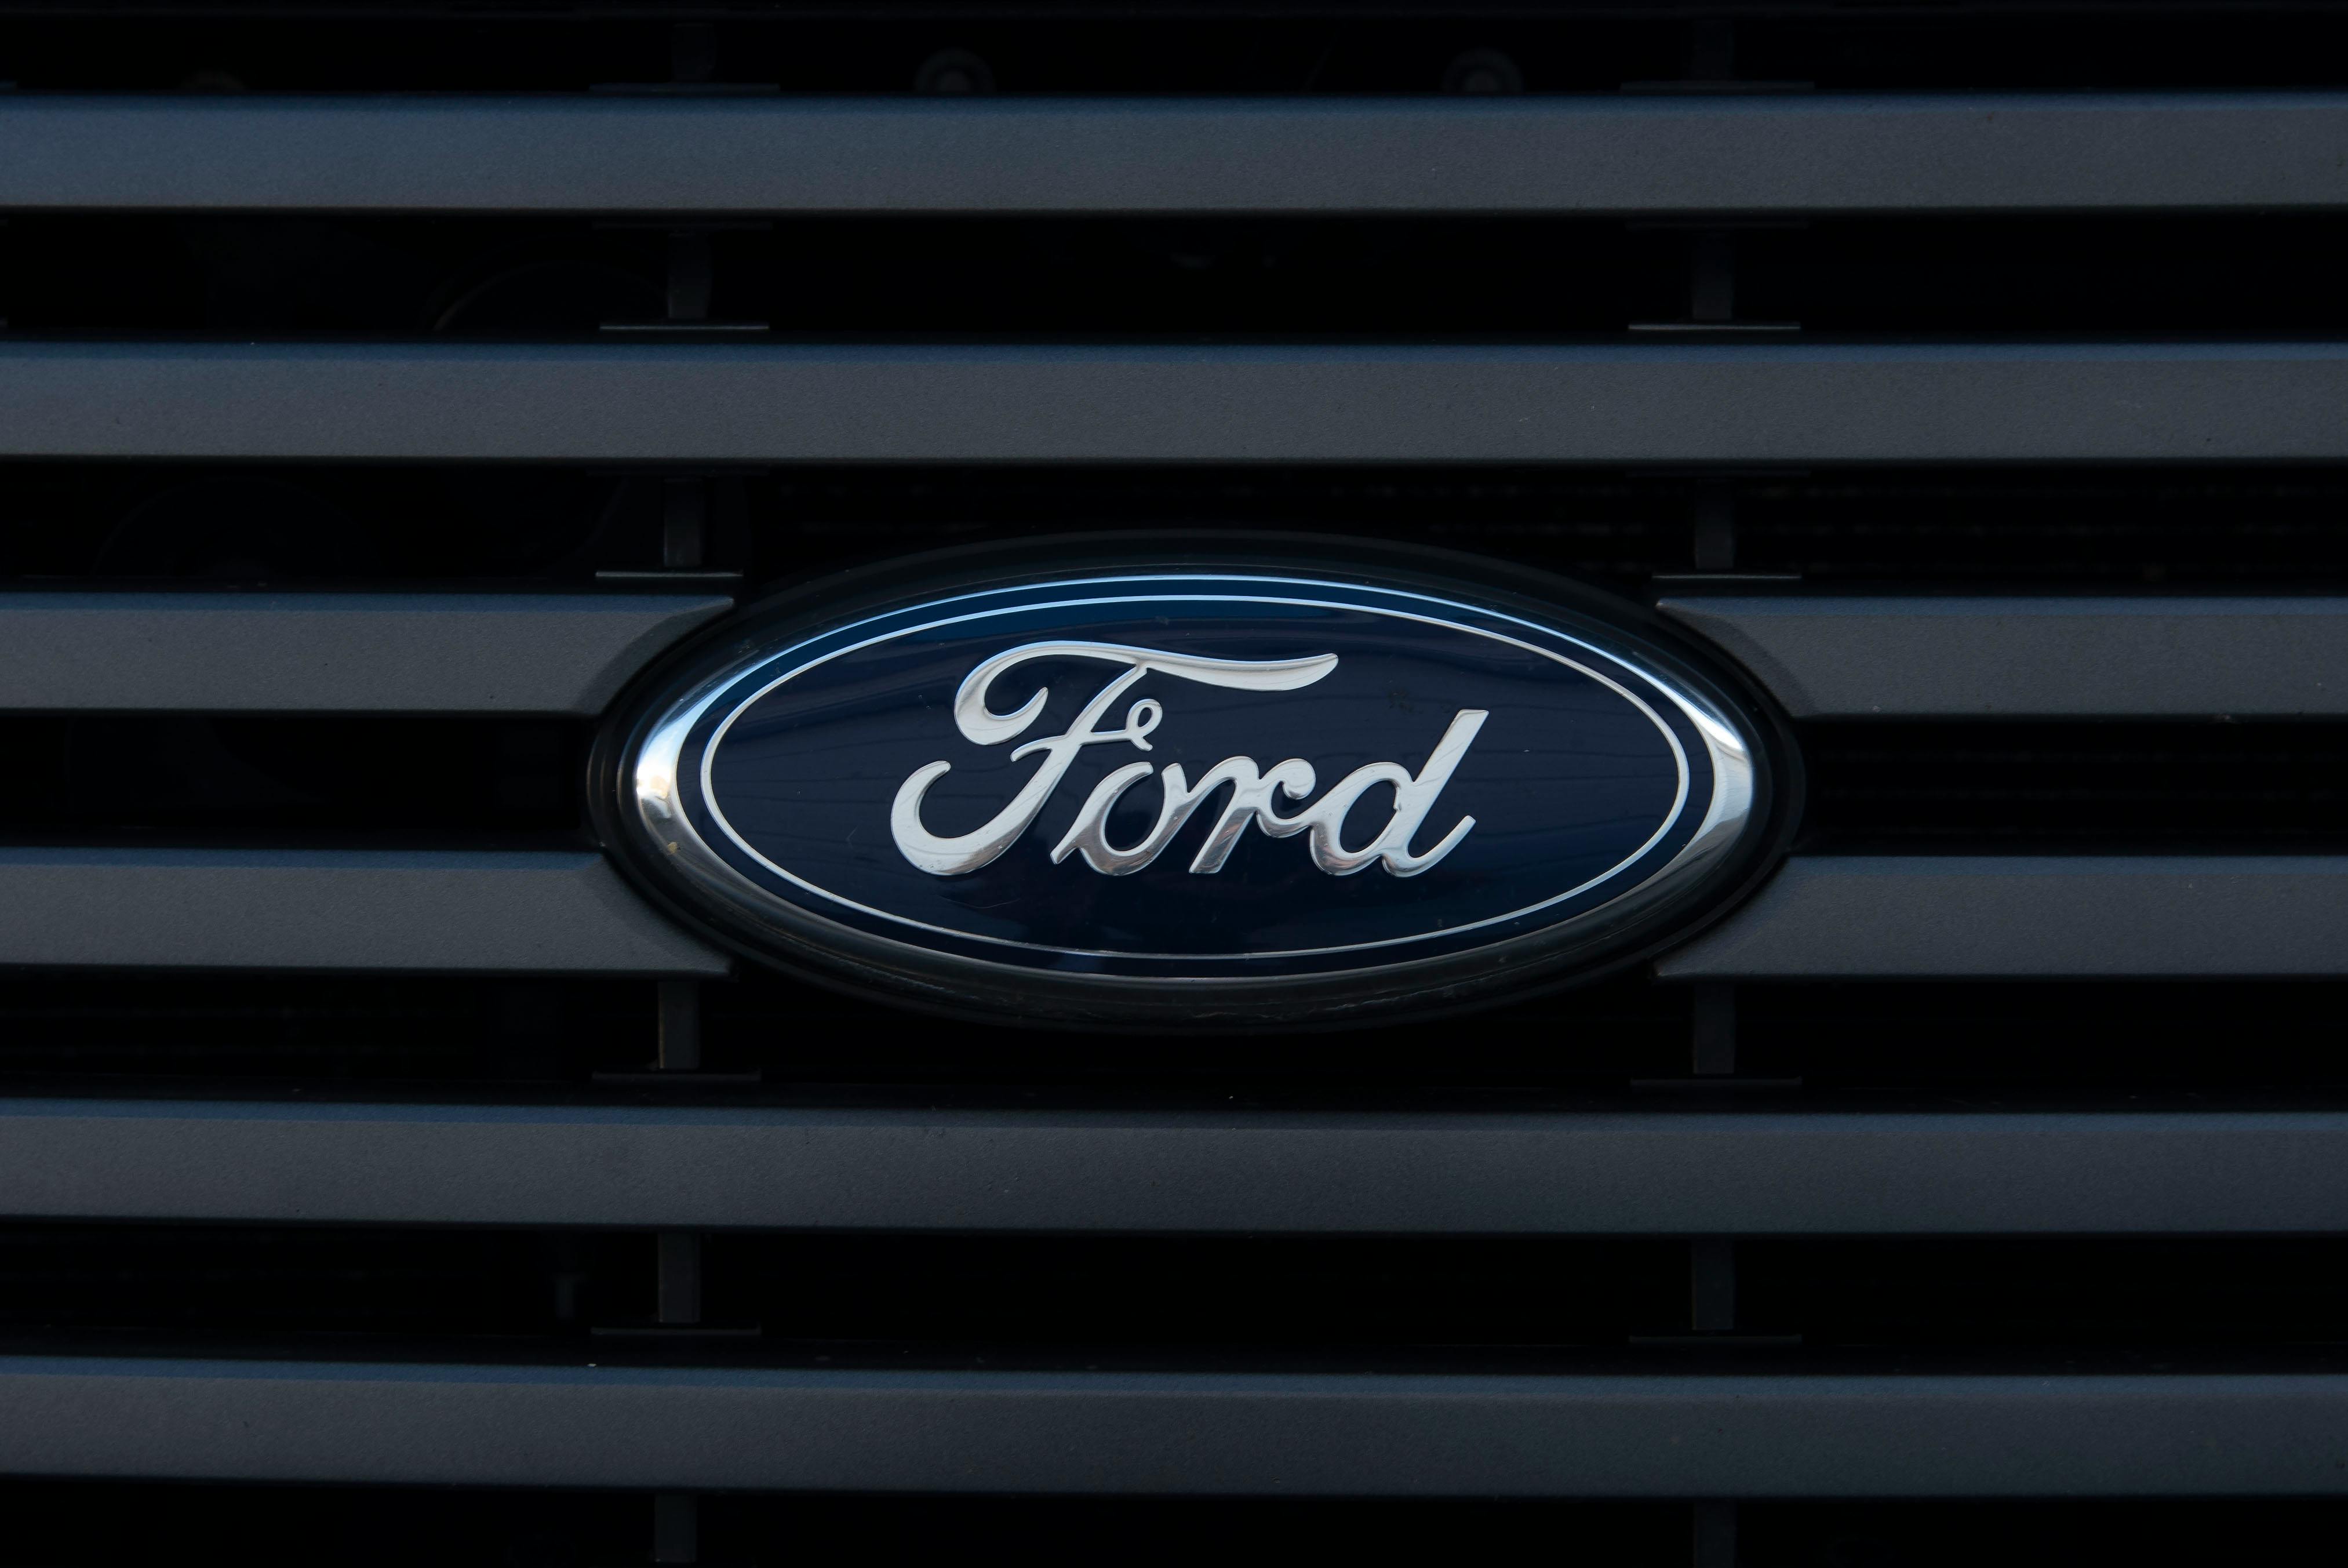 Ford Photos, Download The BEST Free Ford Stock Photos & HD Images